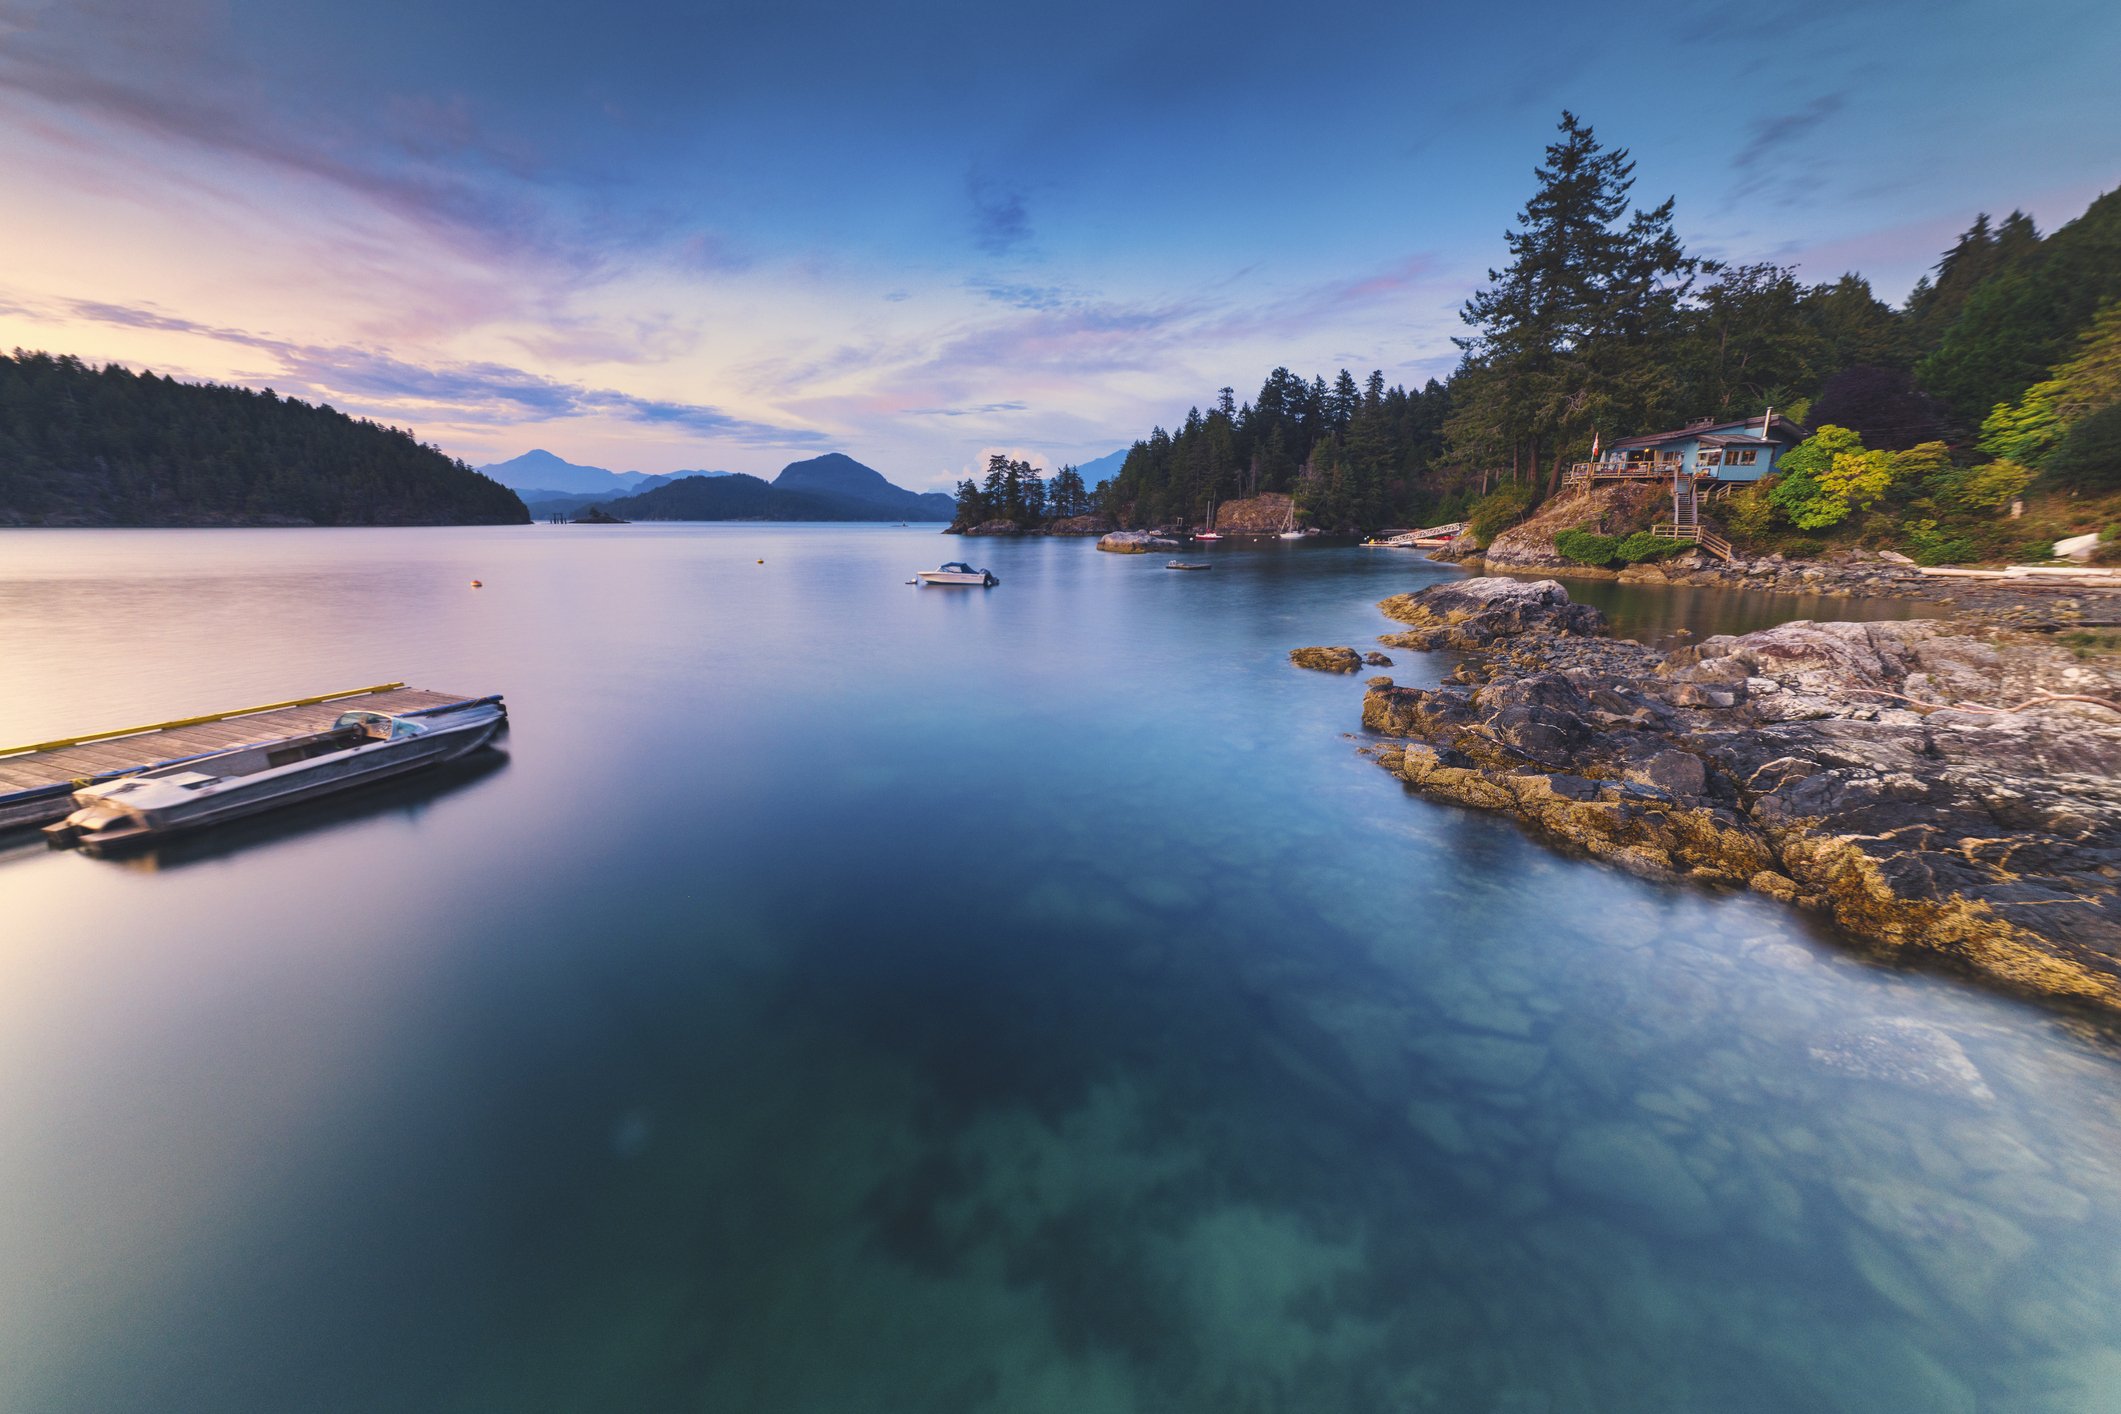 bc-is-awesome-bowen-island-gettyimages-1200425733.jpg